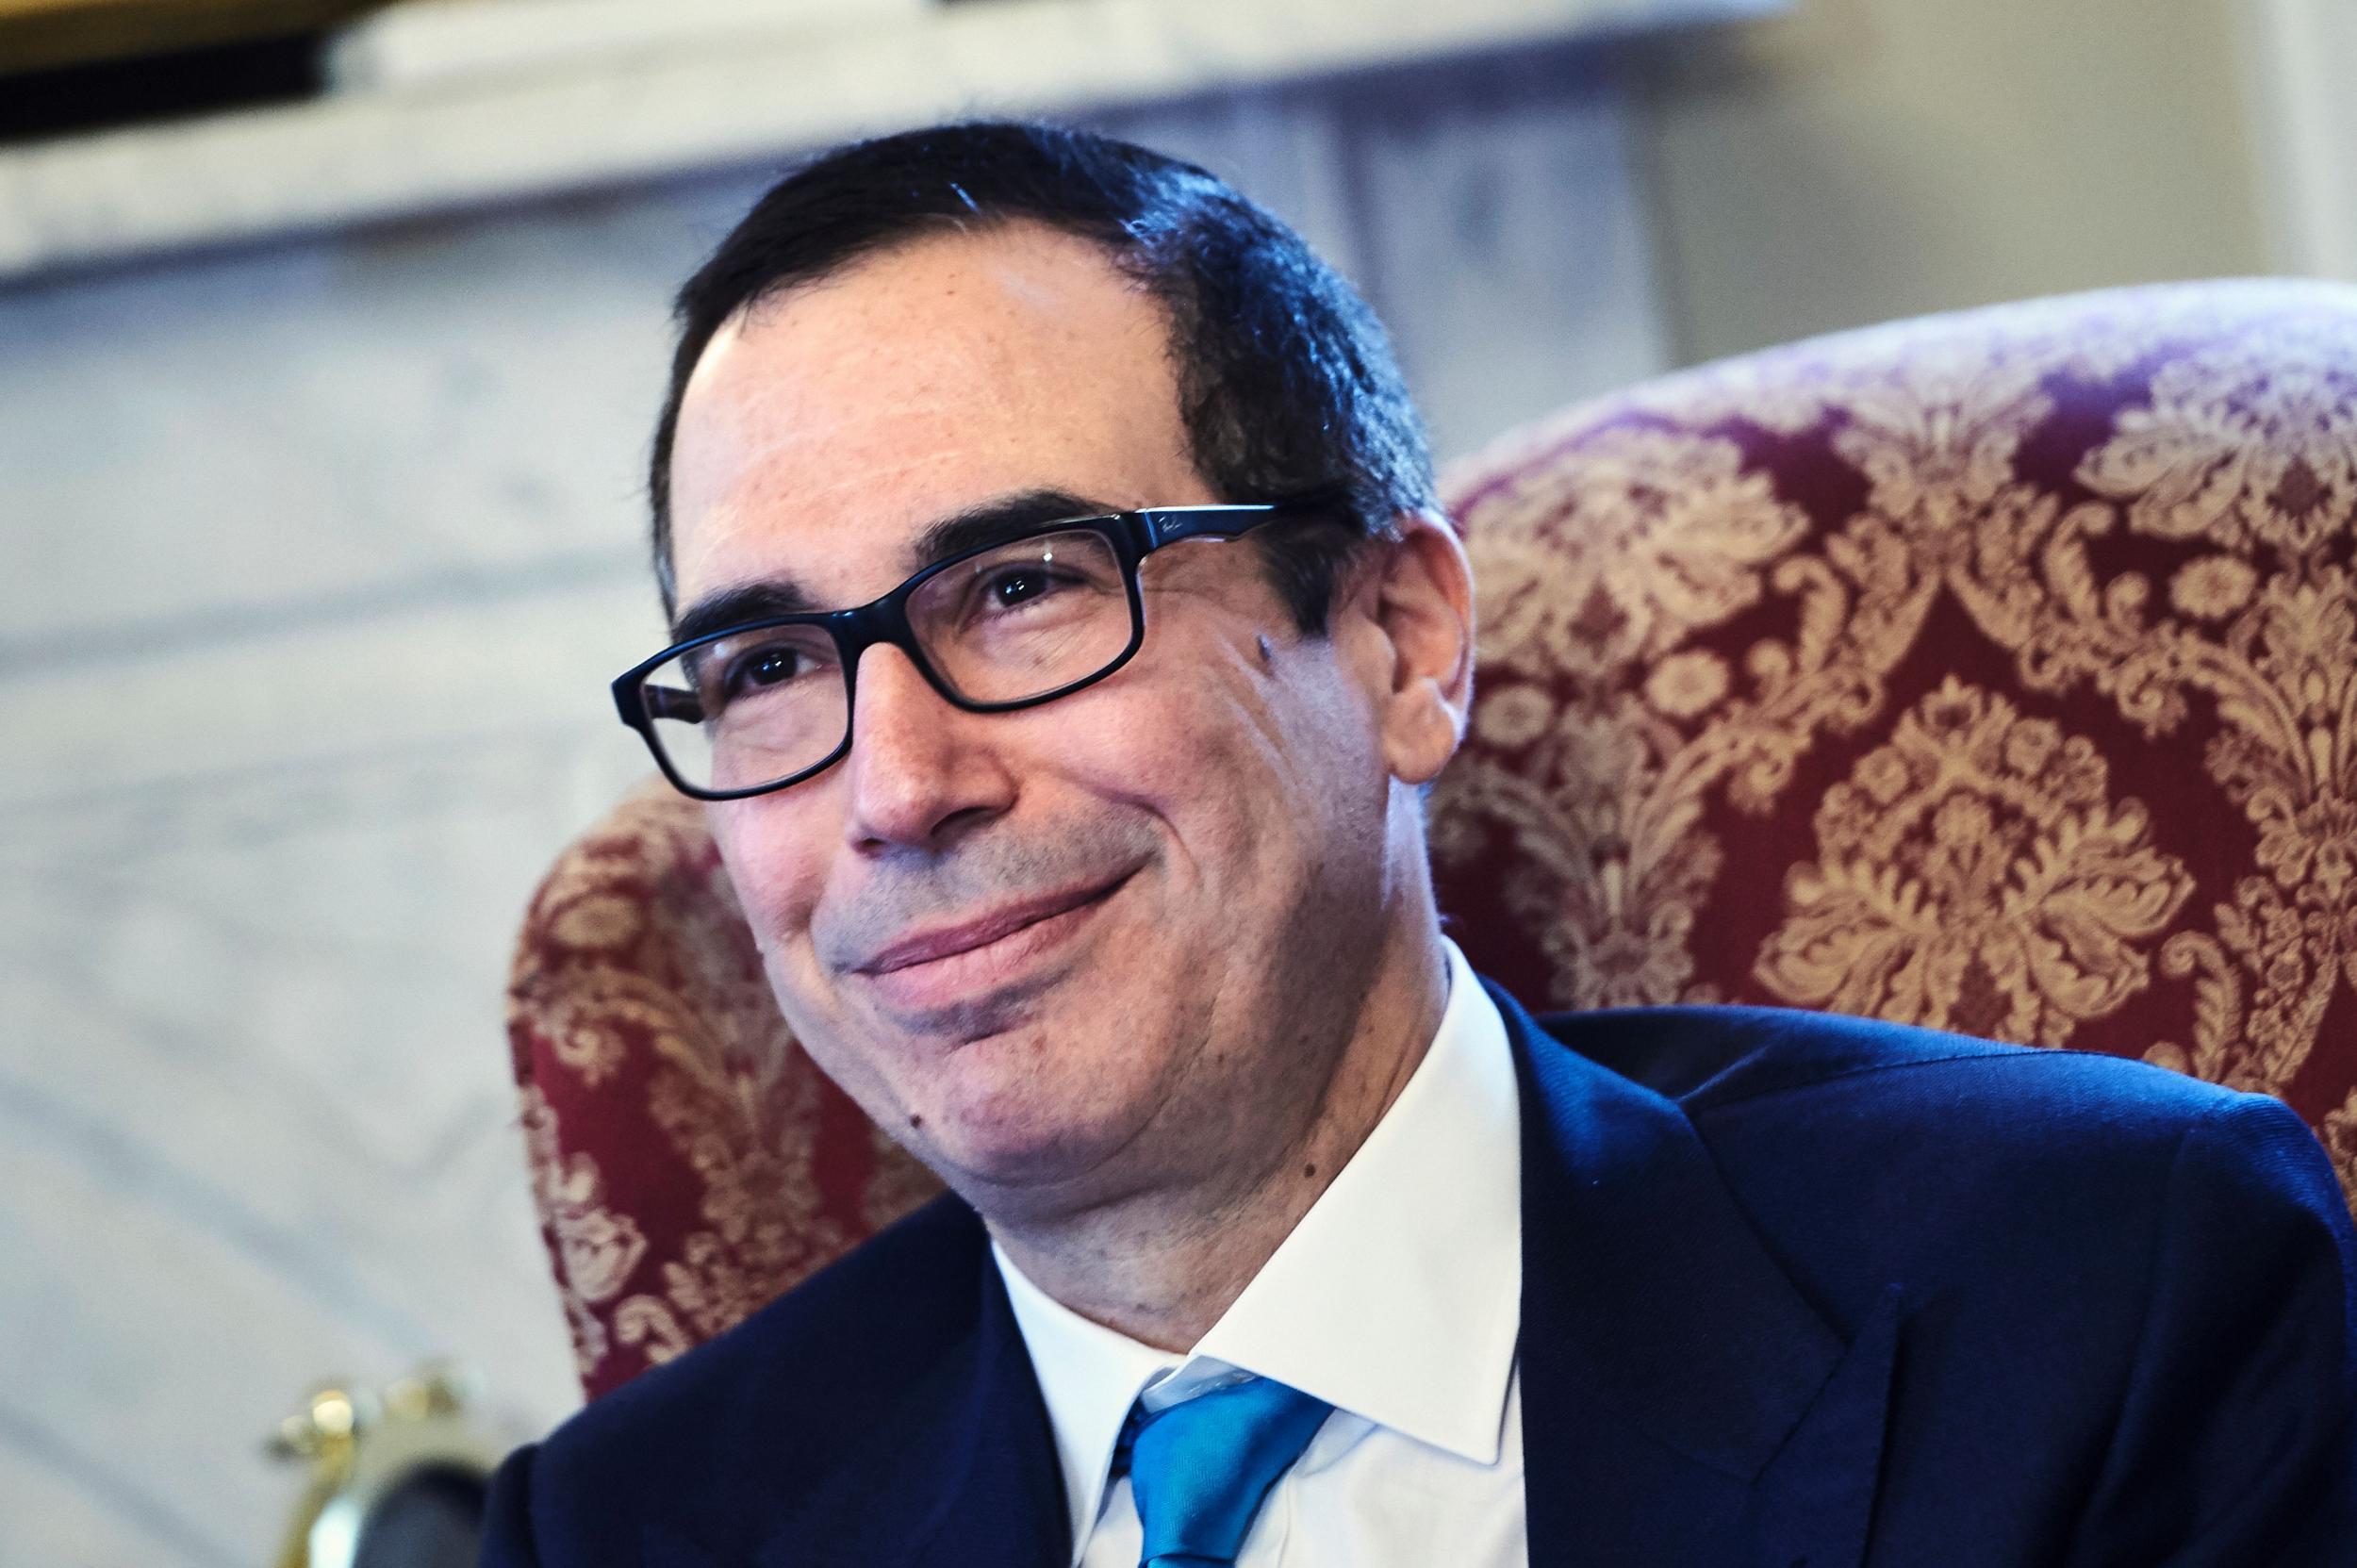 At Goldman Sachs, Mr Mnuchin dealt with collateralised debt obligations and credit default swaps, which arguably played a major part in the 2008 financial crisis